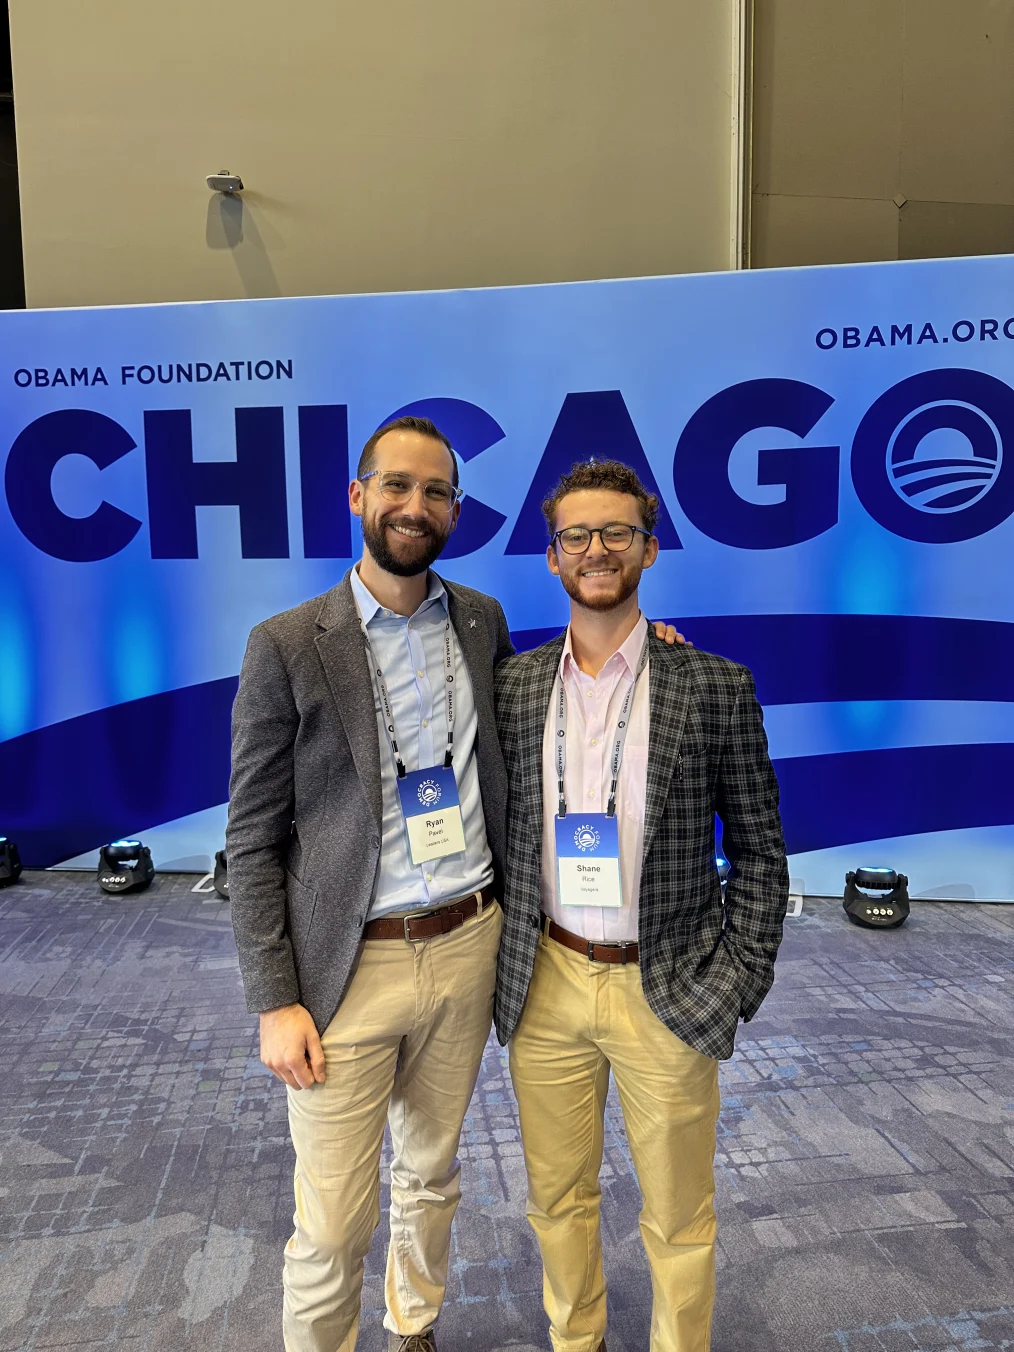 Standing in front of a large blue photo backdrop that reads, “Chicago” in all caps, Ryan Patel and Shane Rice, two white males dressed in business casual attire, have their arms around each other for a photo. Both are wearing blazers. 